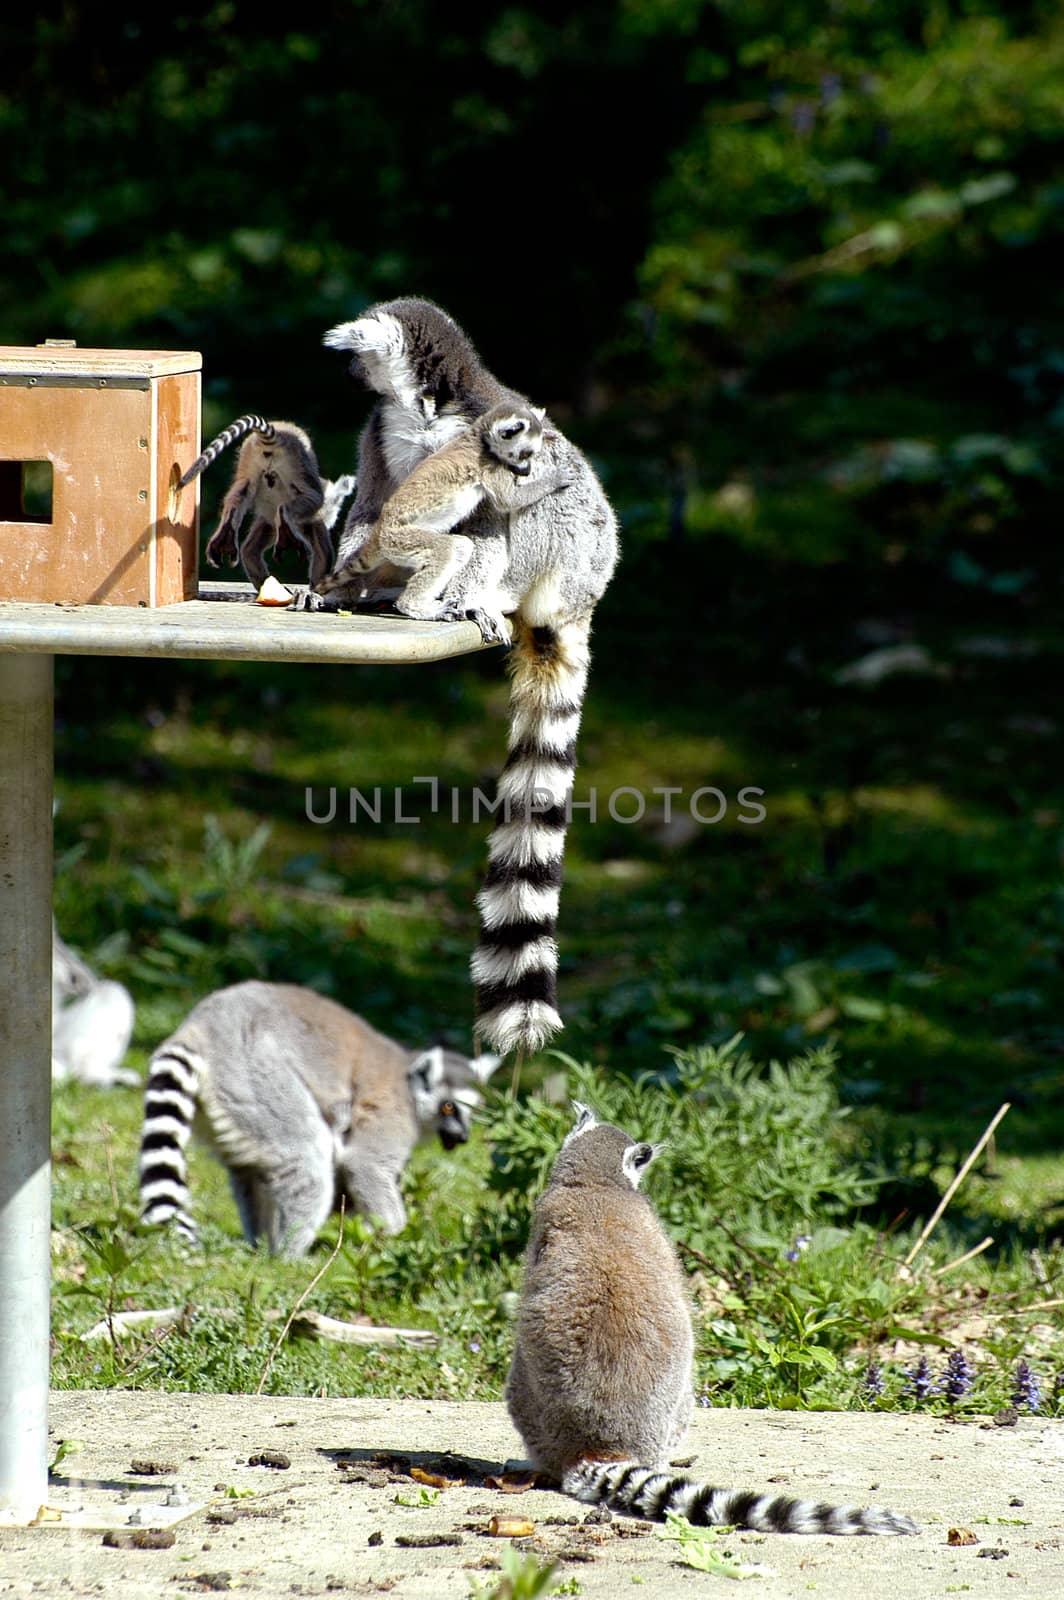 Family of Lemurs to the Zoo by gillespaire